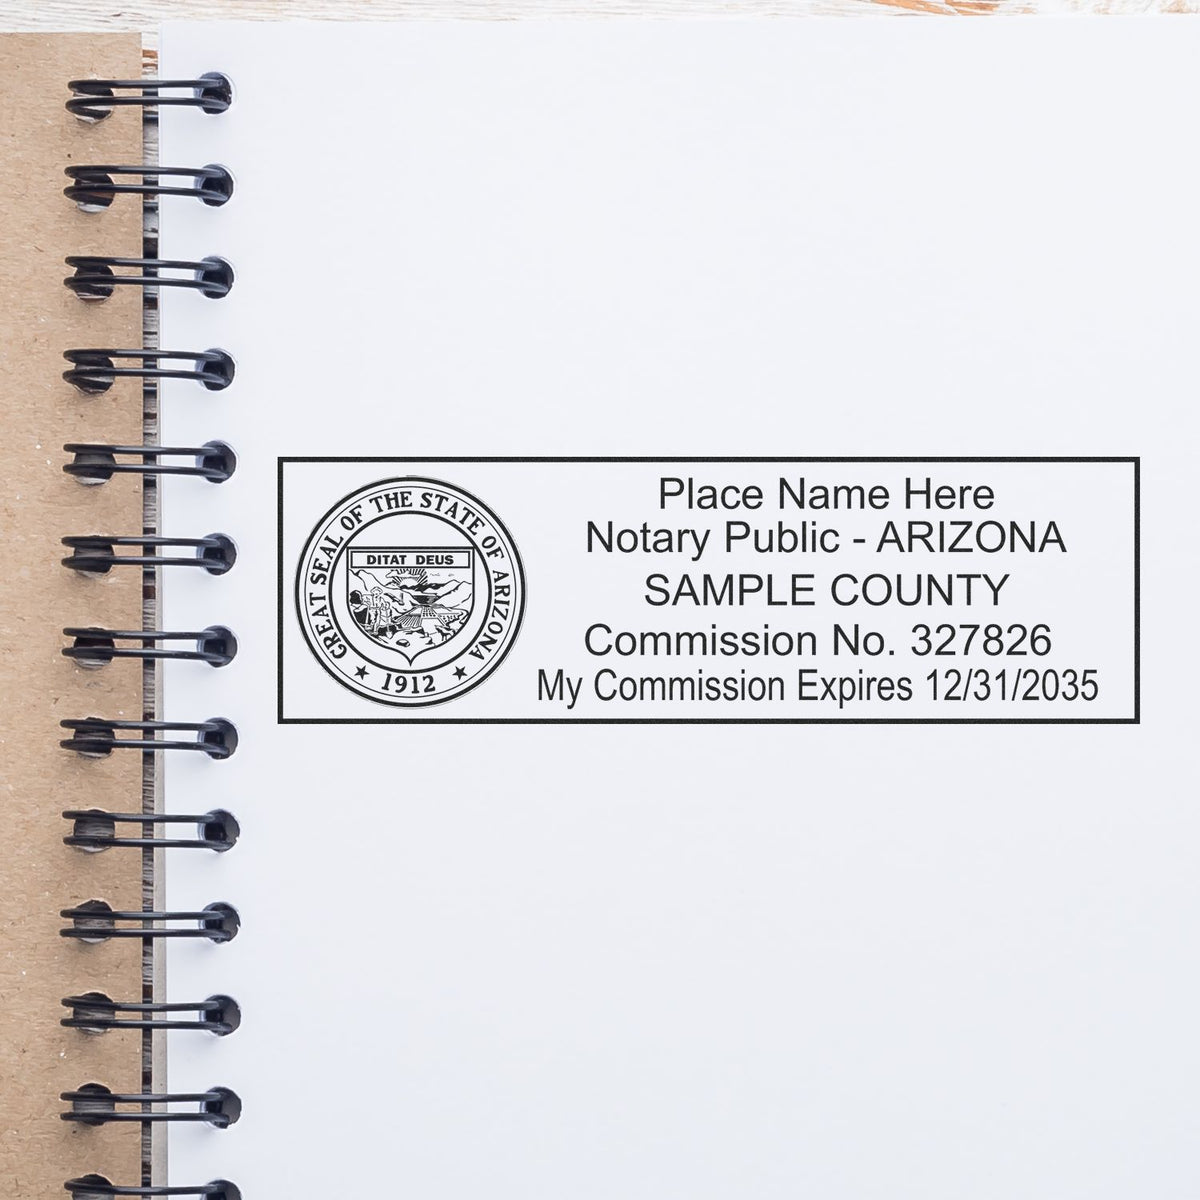 The Slim Pre-Inked State Seal Notary Stamp for Arizona stamp impression comes to life with a crisp, detailed photo on paper - showcasing true professional quality.